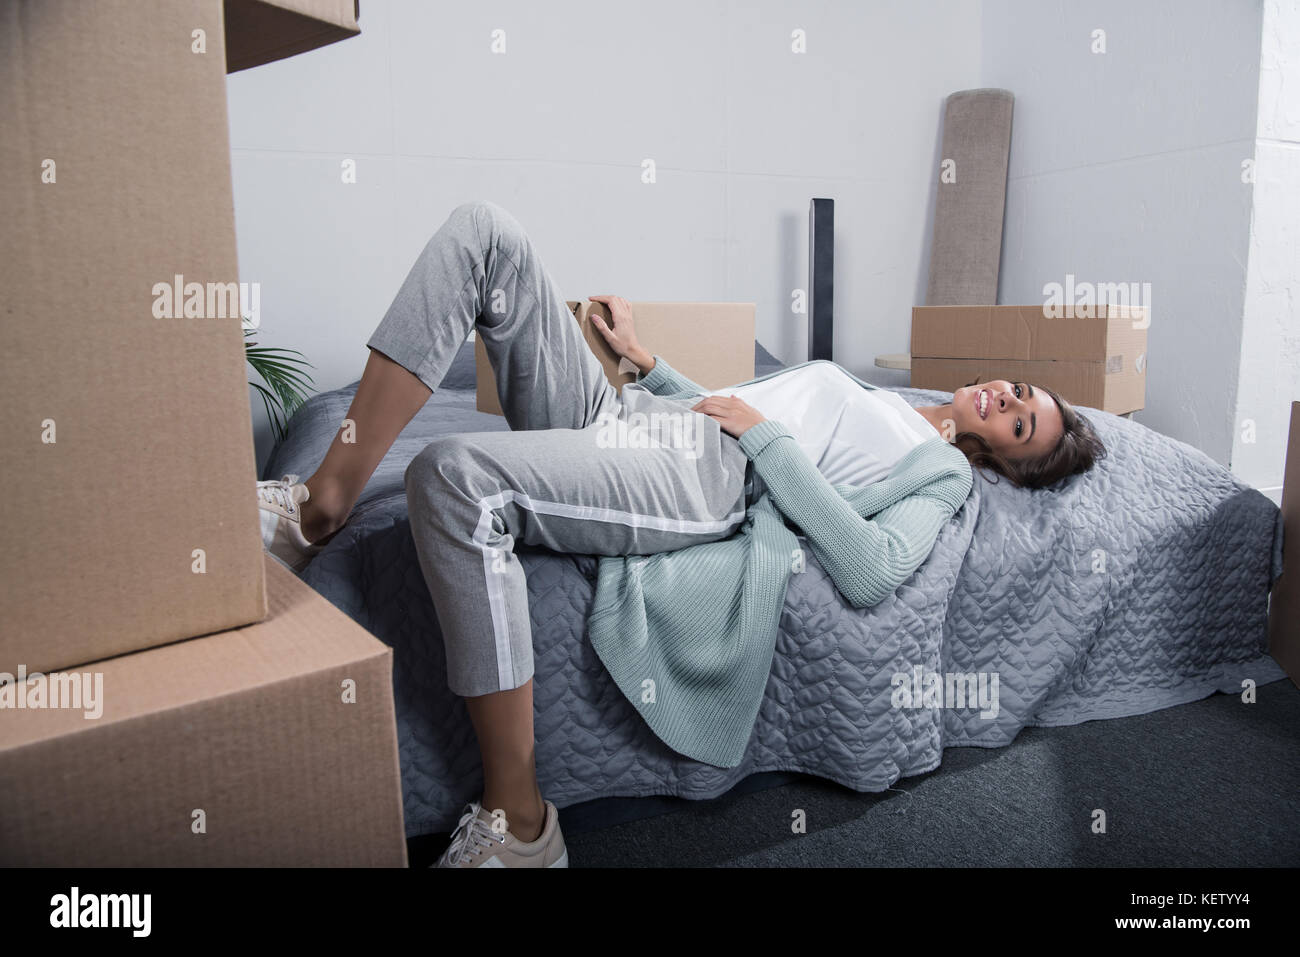 woman lying on bed at home Stock Photo